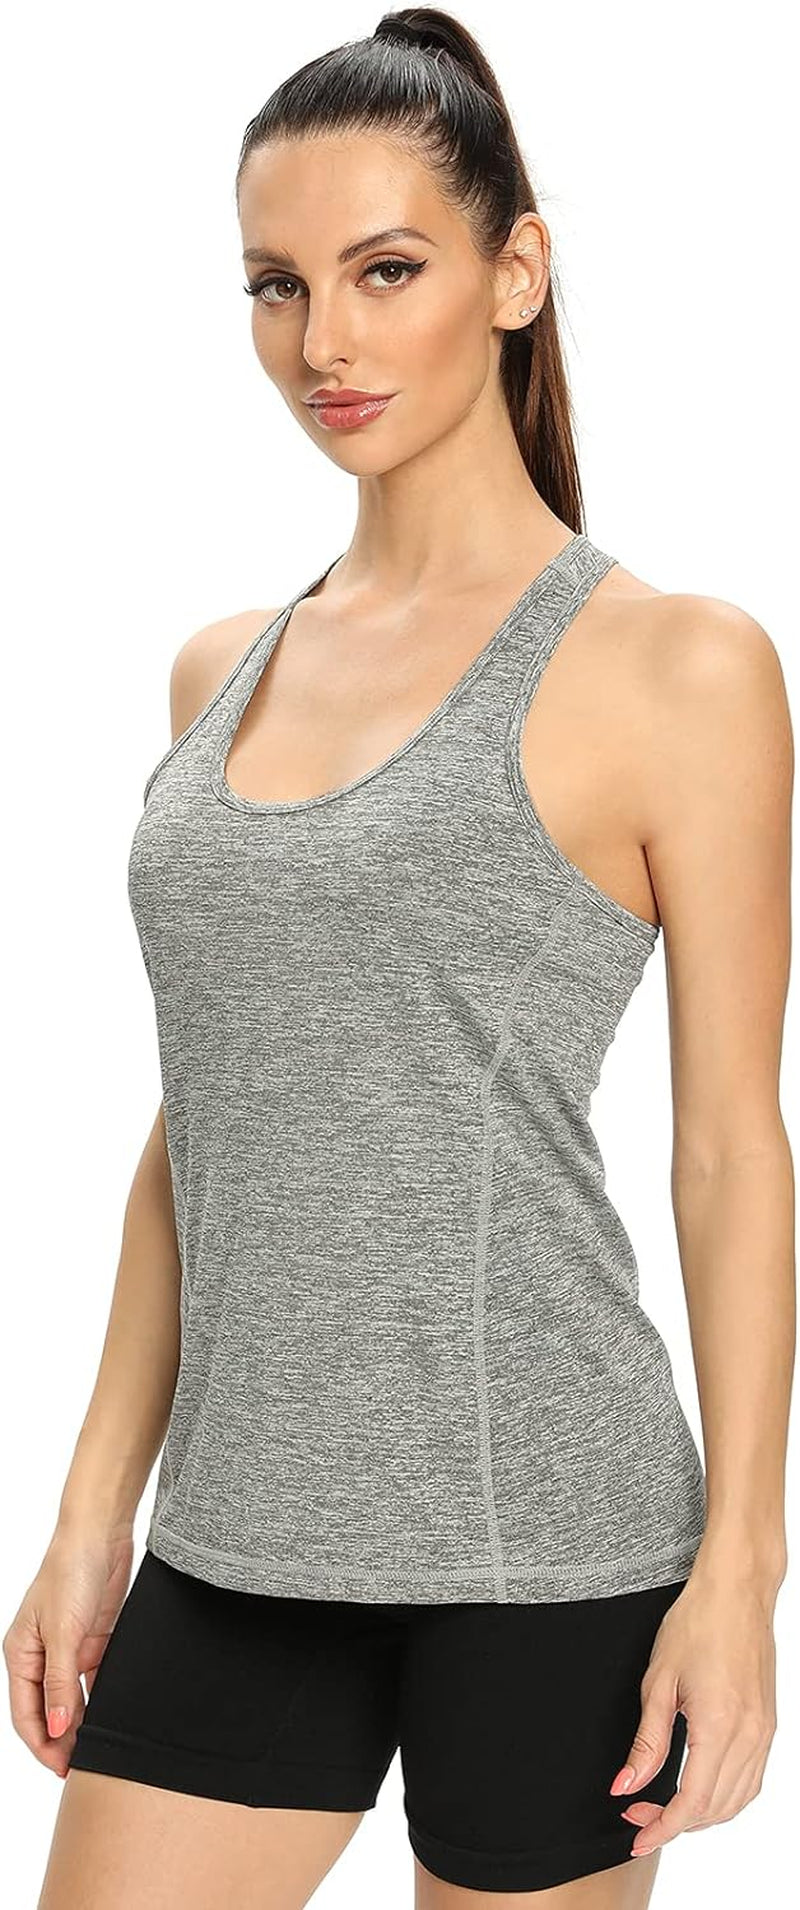 Workout Tank Tops for Women Racerback Athletic Tanks Running Exercise Gym Tank Top - 4 Packs